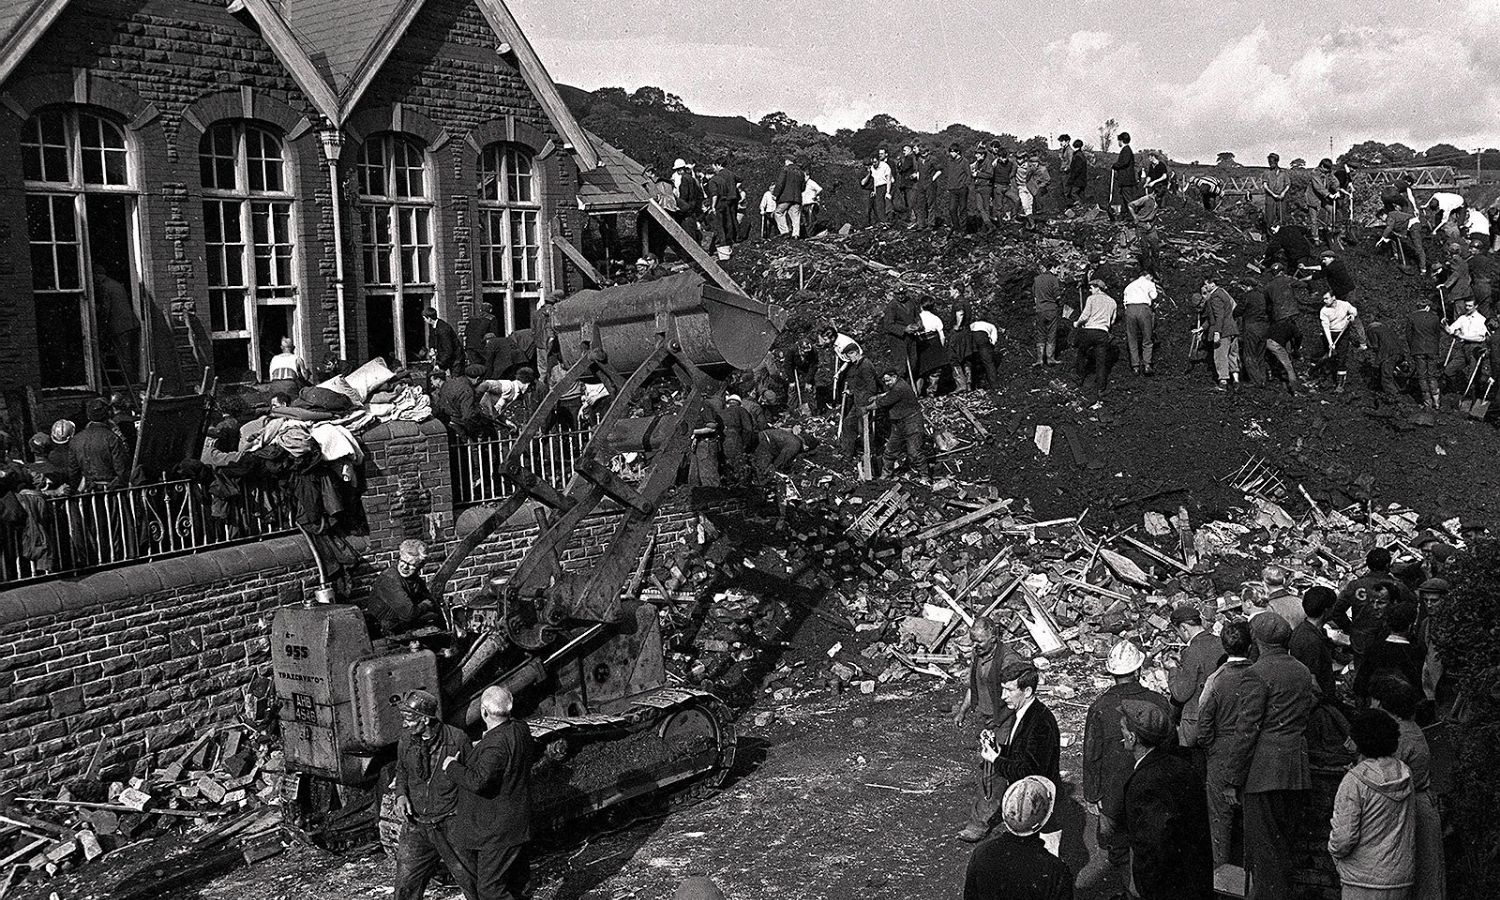 OTD in 1966: The catastrophic Tragedy of Aberfan occurred in South Wales killing many who were in a local school